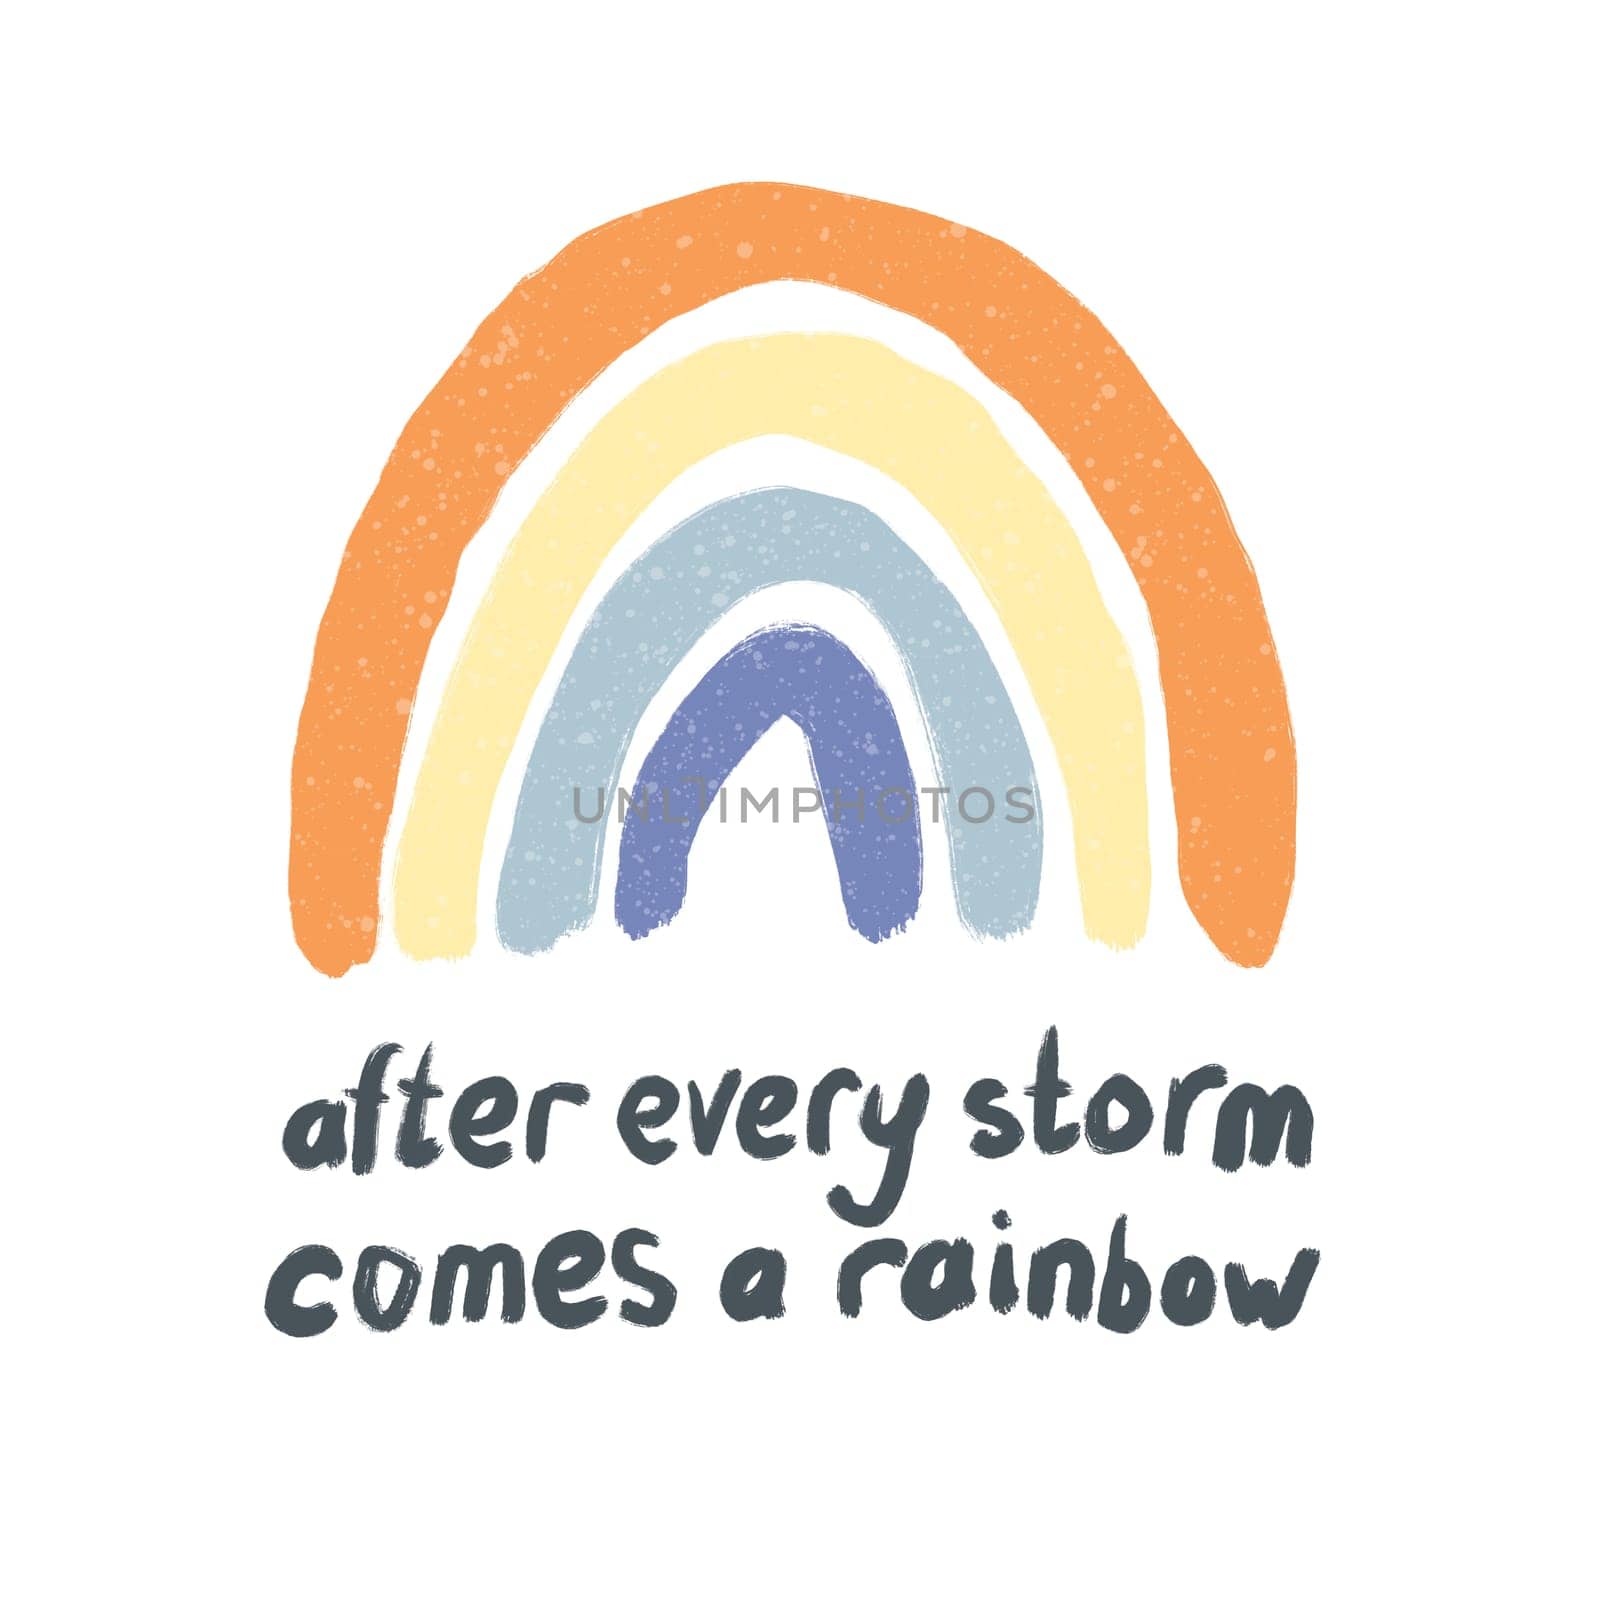 Hand drawn illustration of rainbow. After every storm comes a rainbow. Orange beige blue design in boho style for kids nursery decor, baby cartoon poster in minimalist print